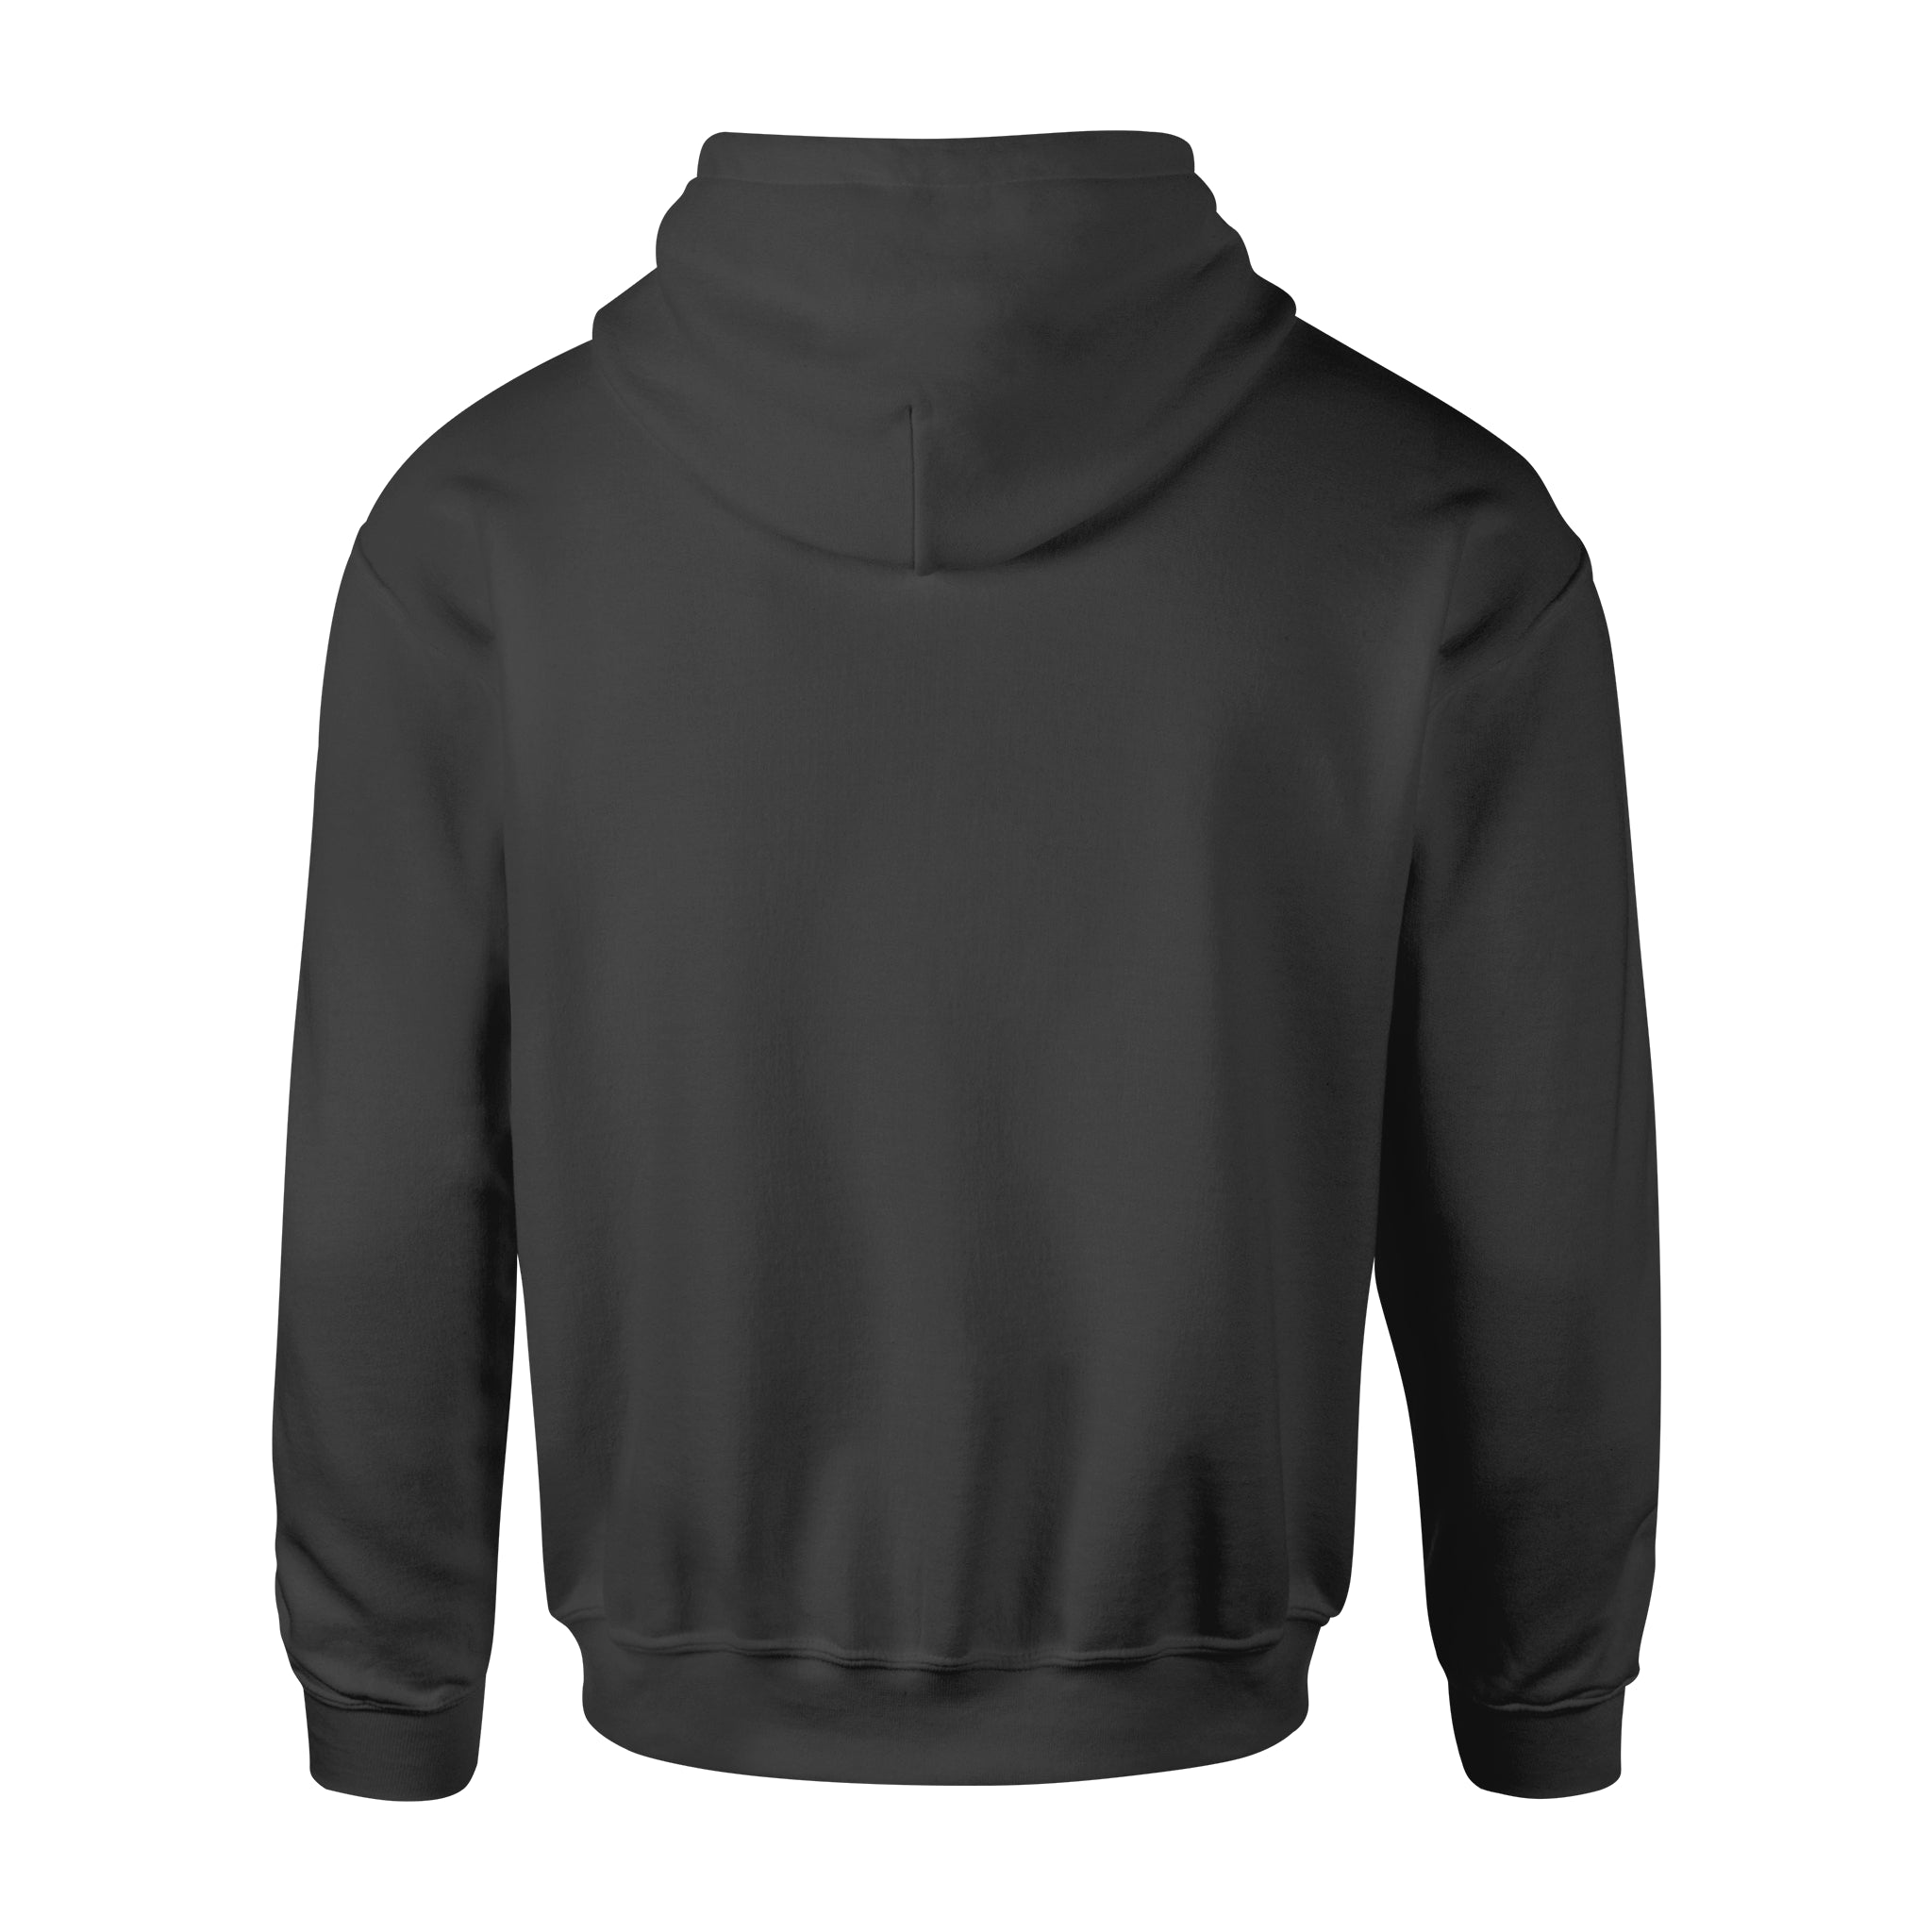 Life Is A Journey Enjoy The Ride -  Hoodie